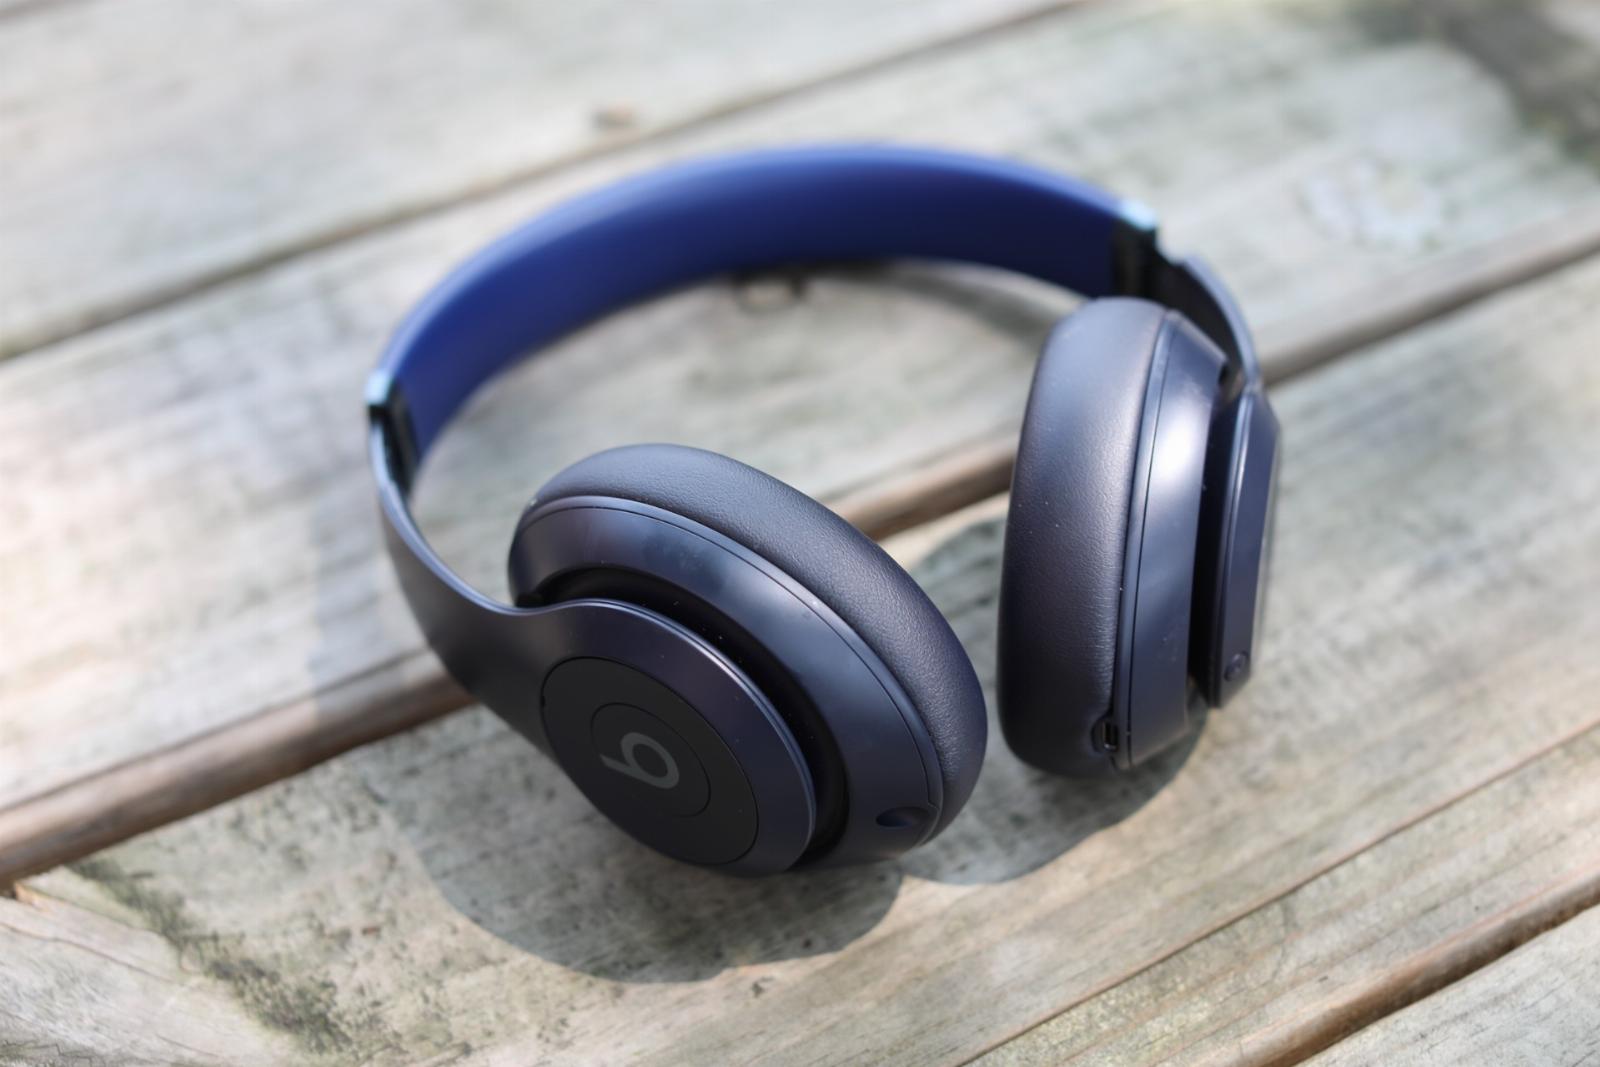 After five years, Beats Studio 3’s replacement is finally here